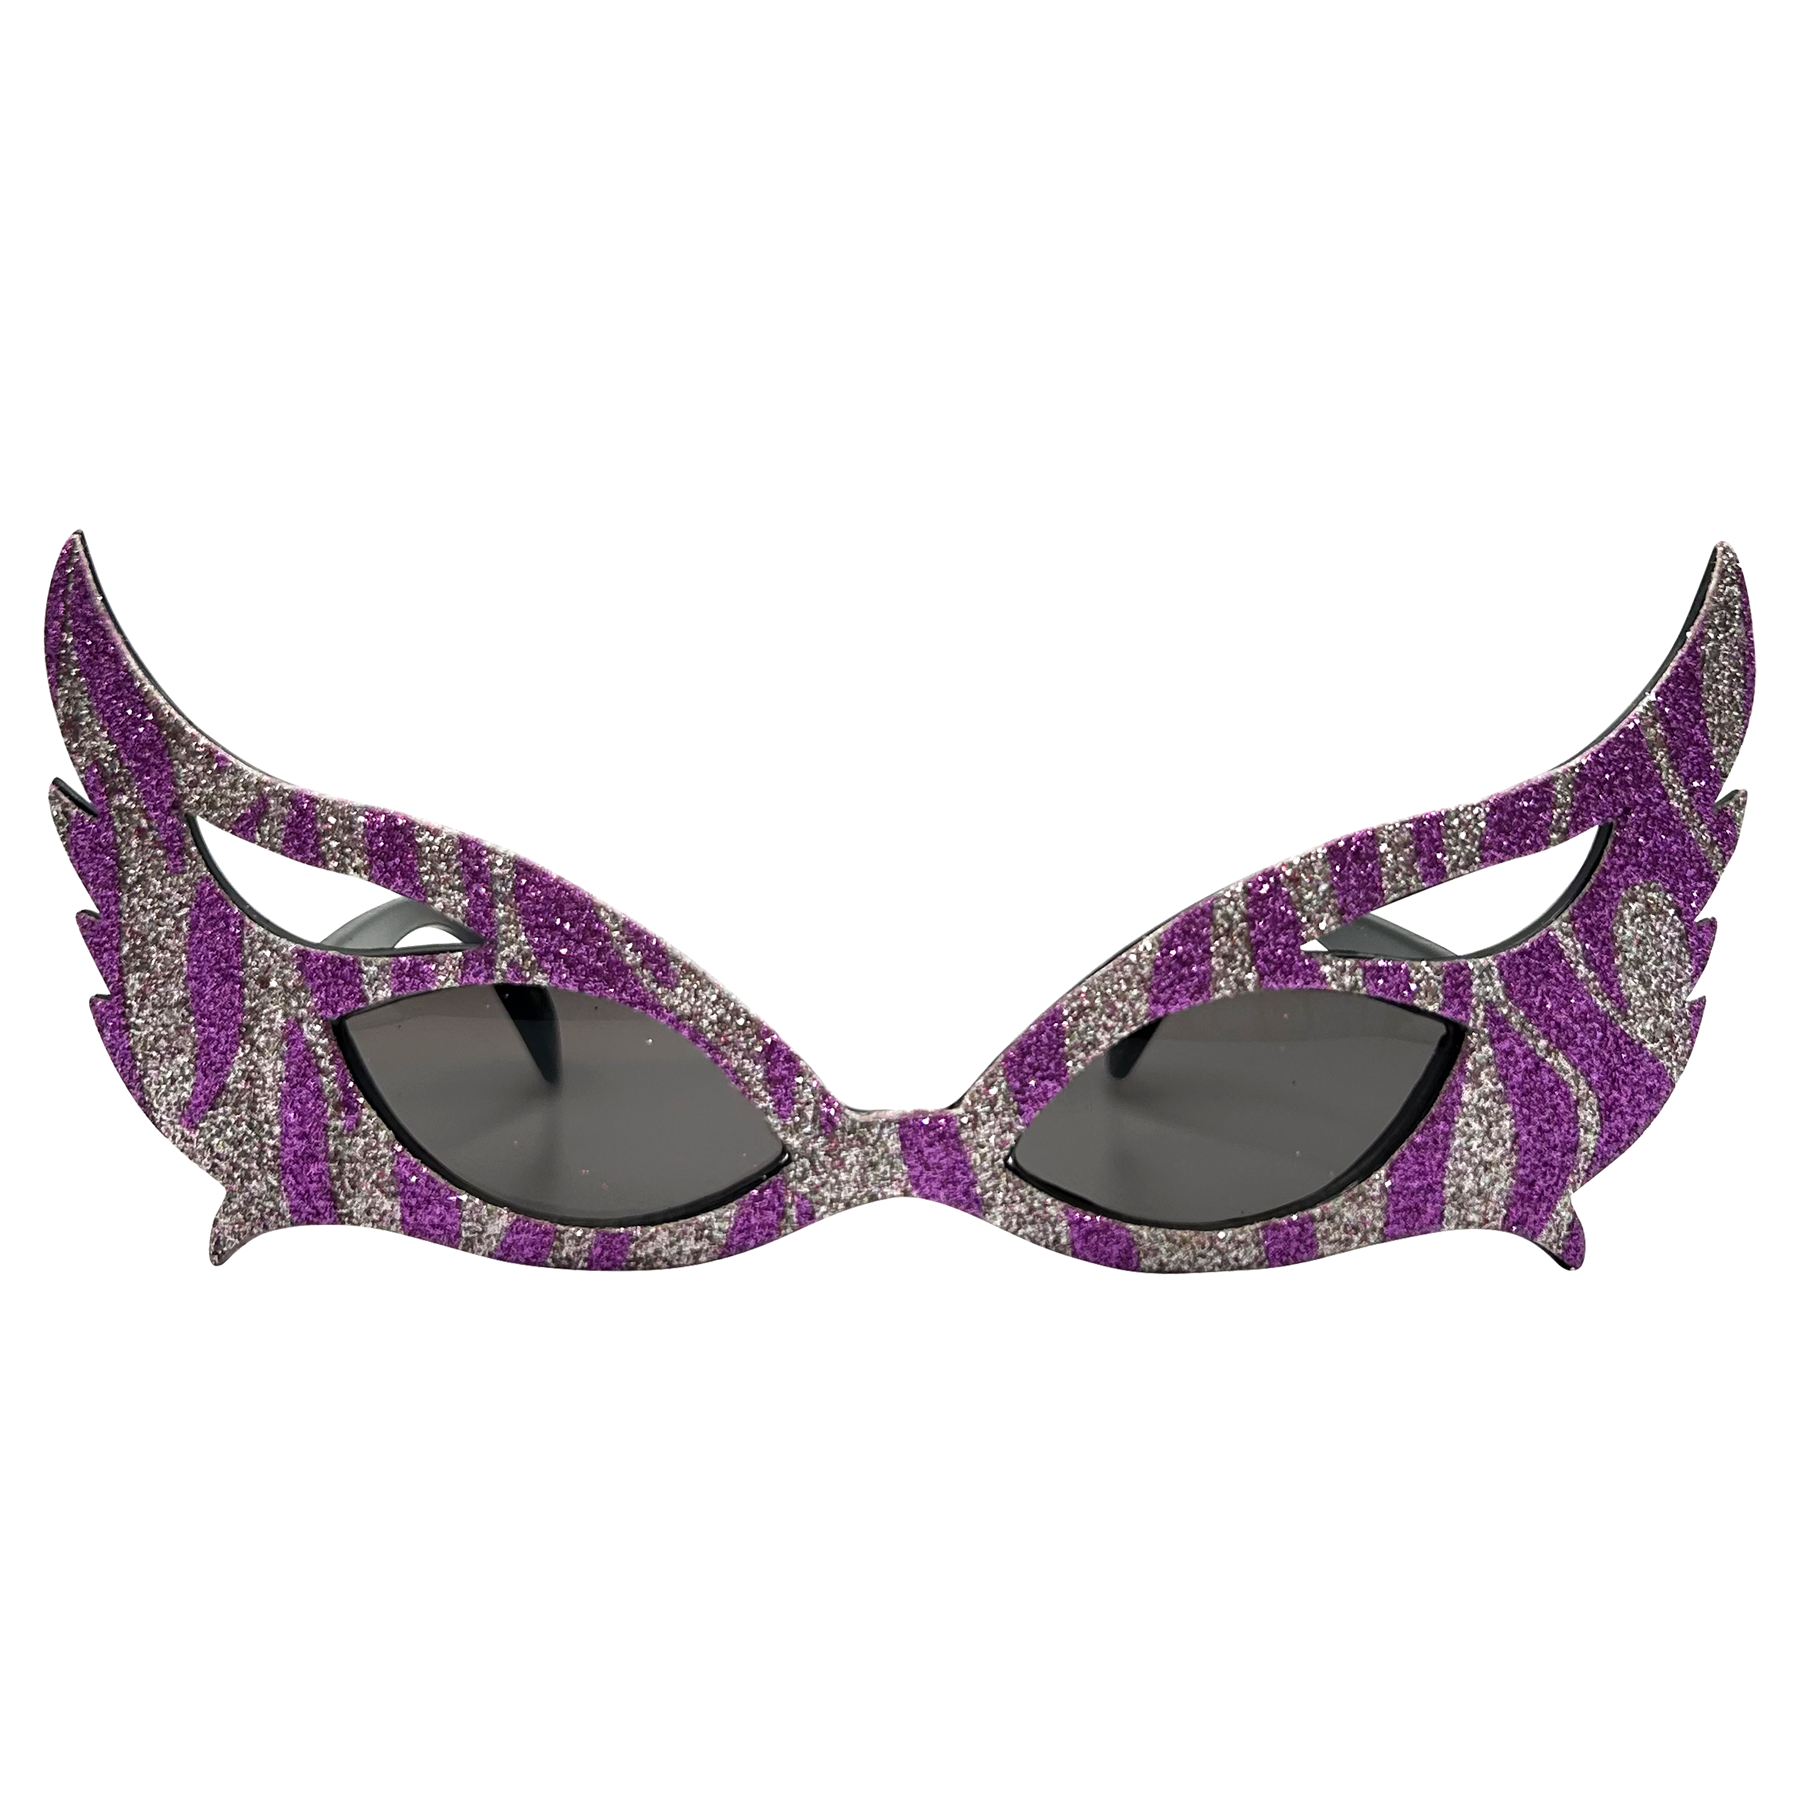 WHISKERS Sparkly Cat-Eye Party Sunglasses